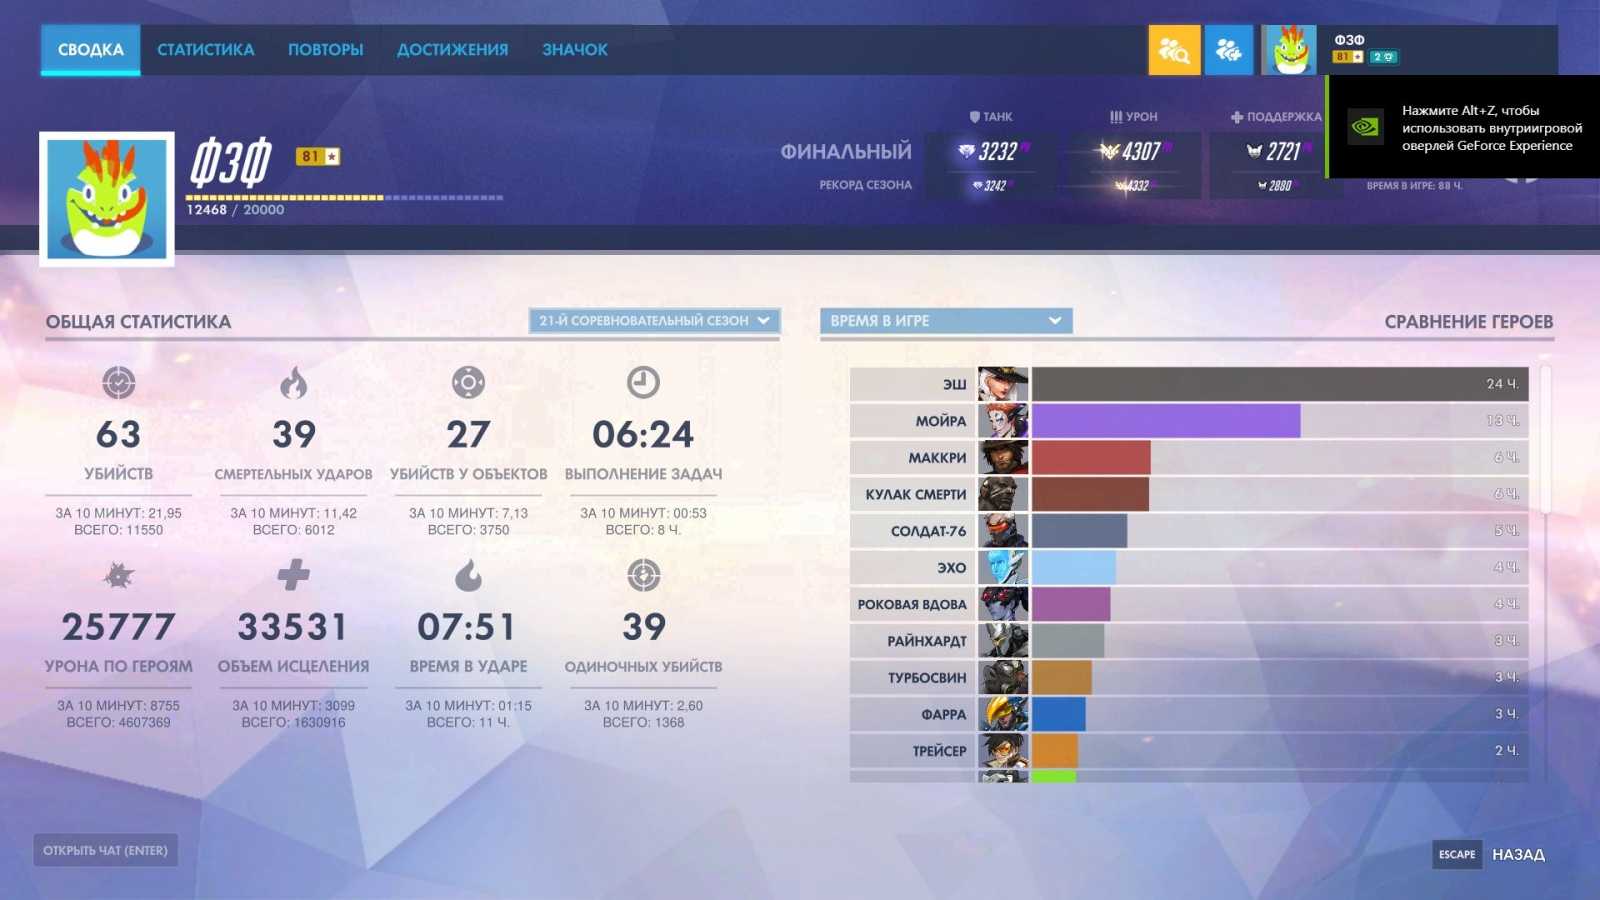 Overwatch live player count and statistics